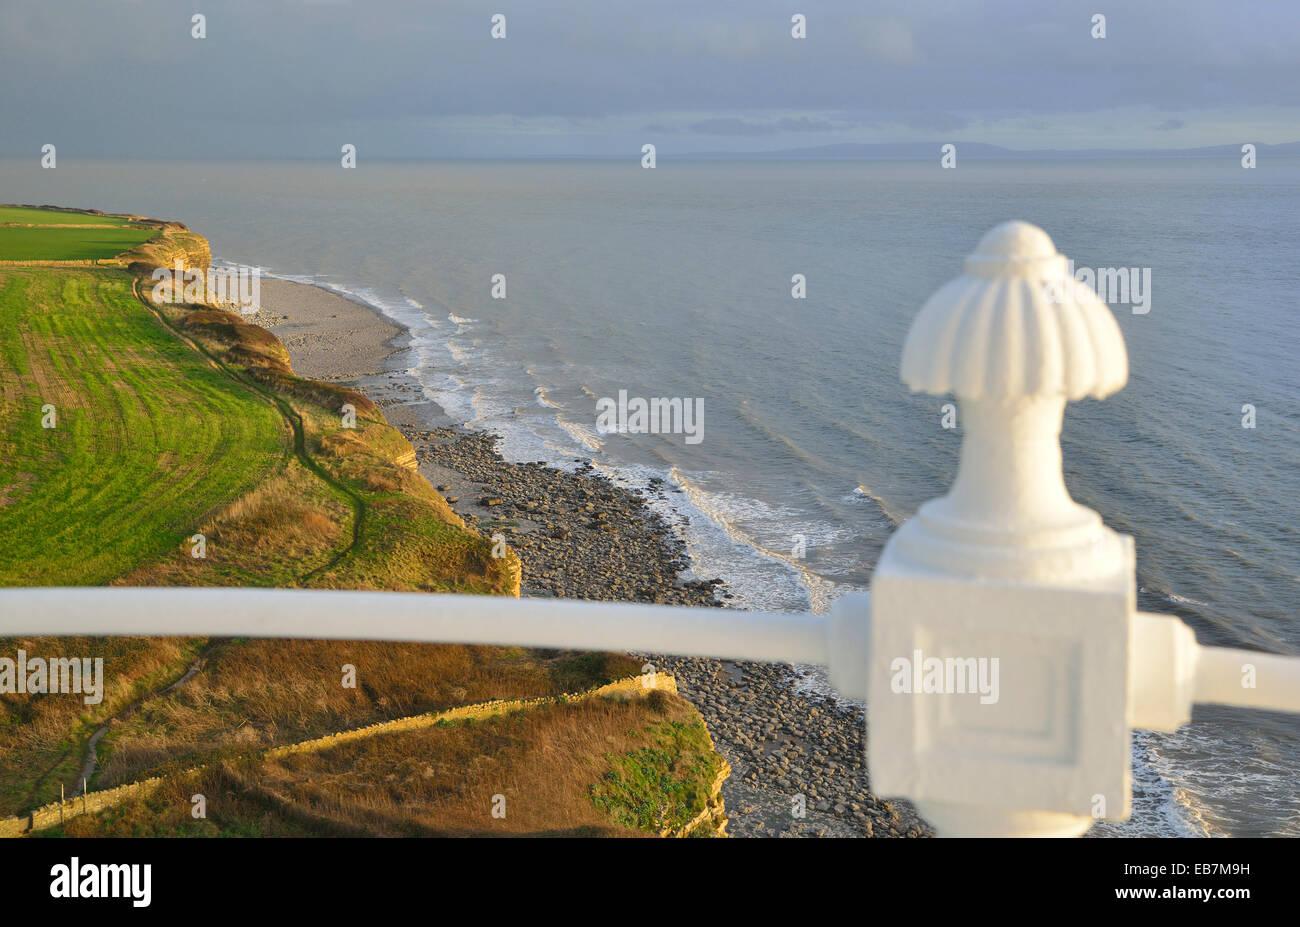 Coastal Marine scape from Nash Point Lighthouse in South Glamorgan Wales UK  looking  Eastward, Stock Photo